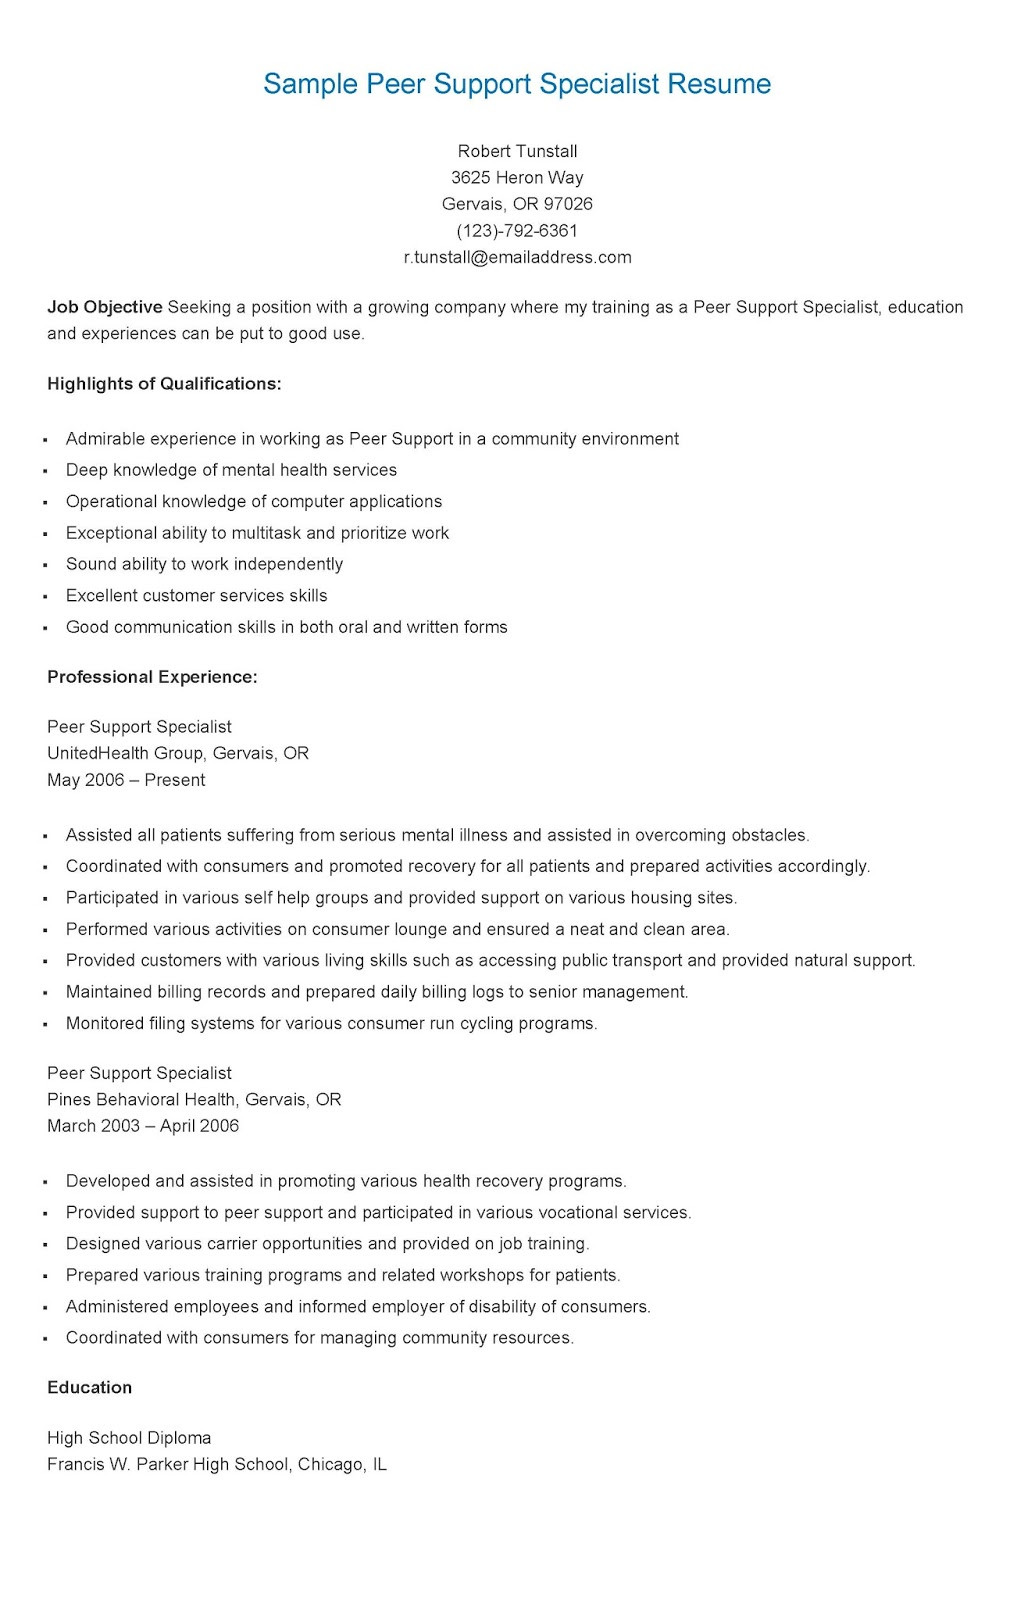 Sample Resume for Peer Support Specialist Resume Samples Sample Peer Support Specialist Resume